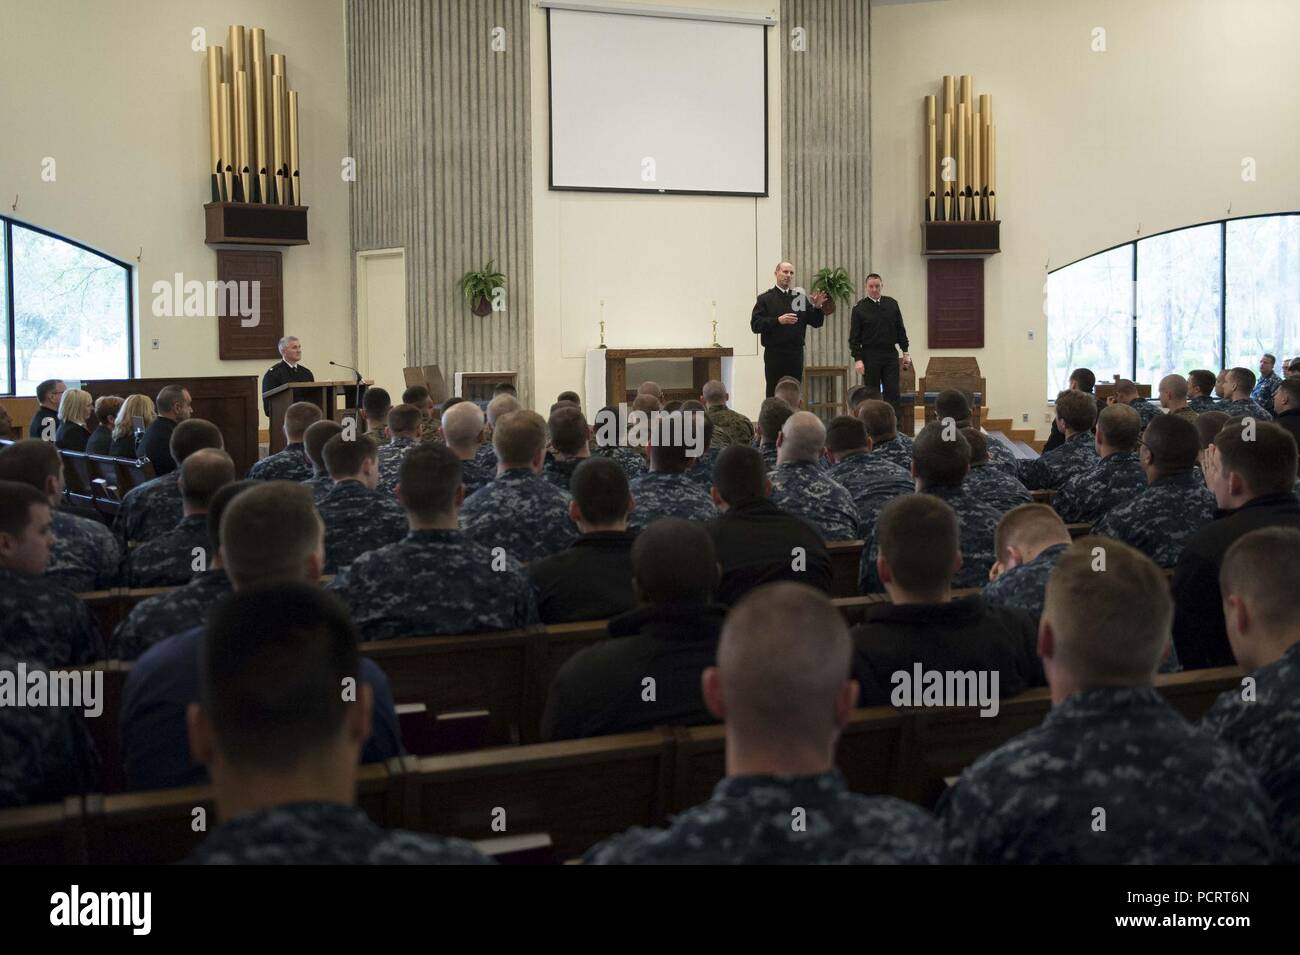 KINGS BAY, Ga. (March 18, 2014) Chief of Naval Operations (CNO) Adm. Jonathan Greenert holds an all-hands call with Master Chief Petty Officer of the Navy (MCPON) Mike Stevens at Naval Submarine Base Kings Bay to discuss the current and future status of the Navy. Greenert and Stevens also took questions from the audience about topics such as pay, compensation and quality of life. Stock Photo